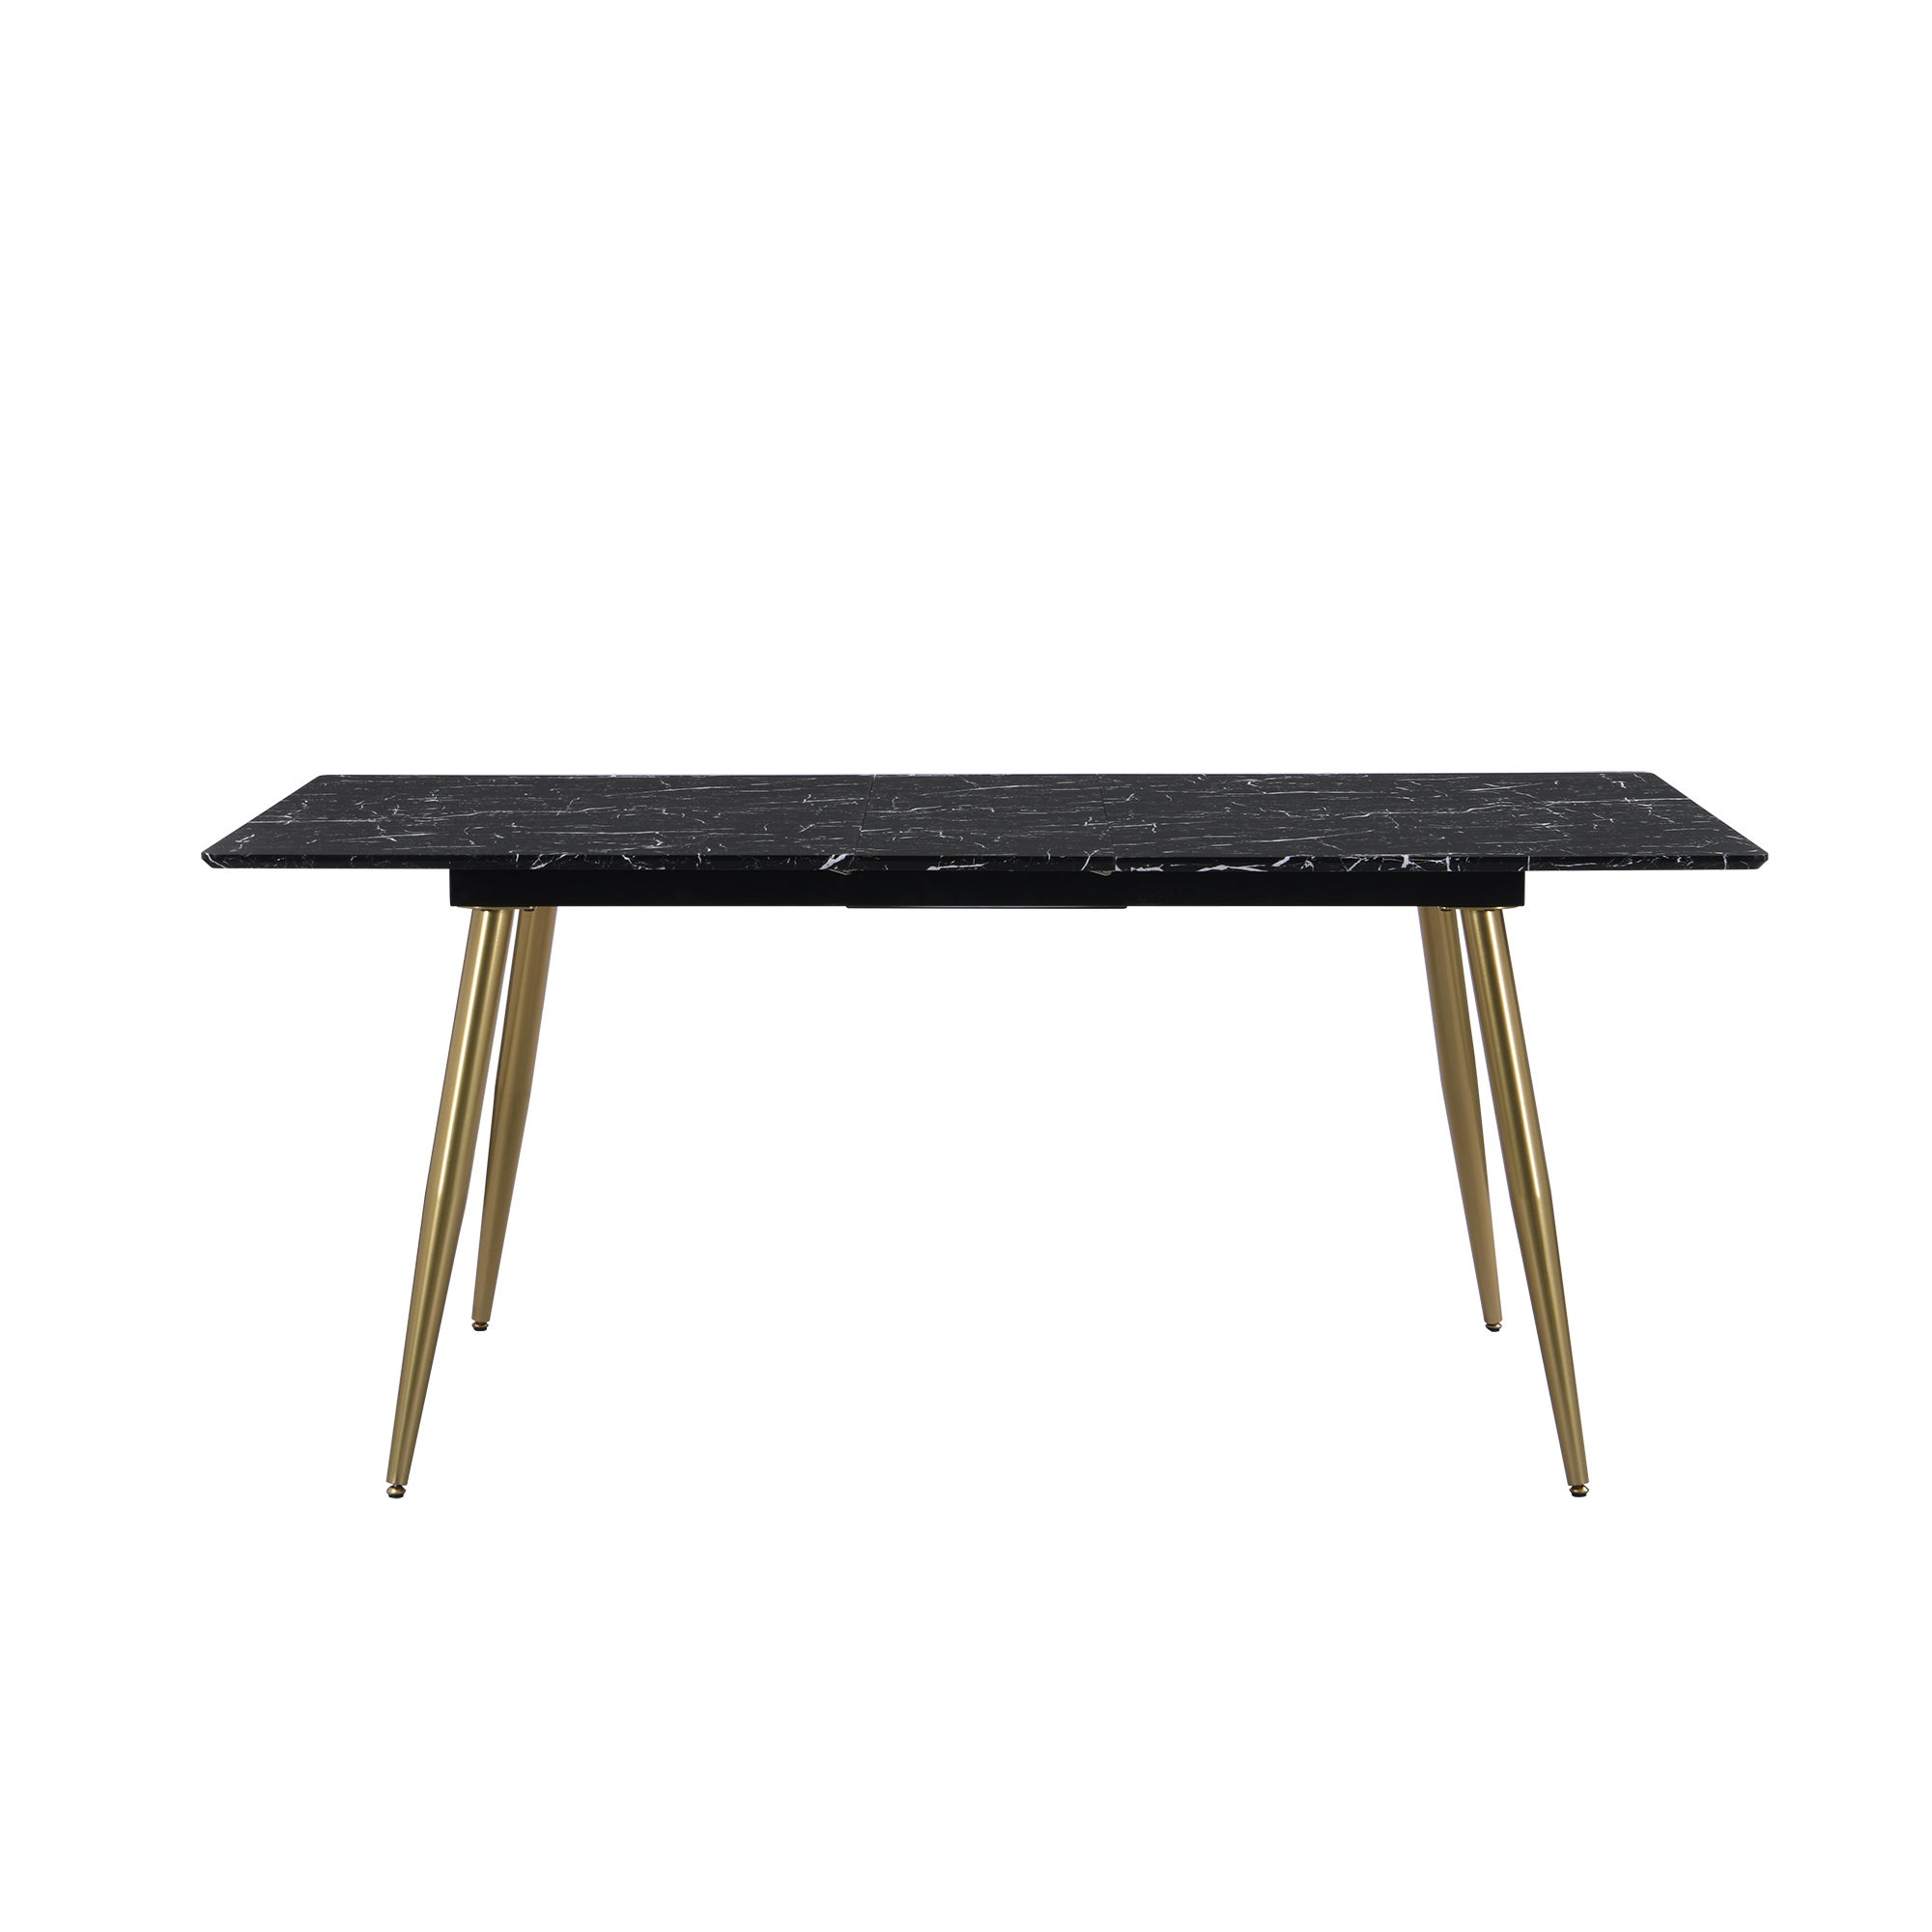 Kendall 6 8 Seater Rectangular Extendable Dining Table Marble Effect Black